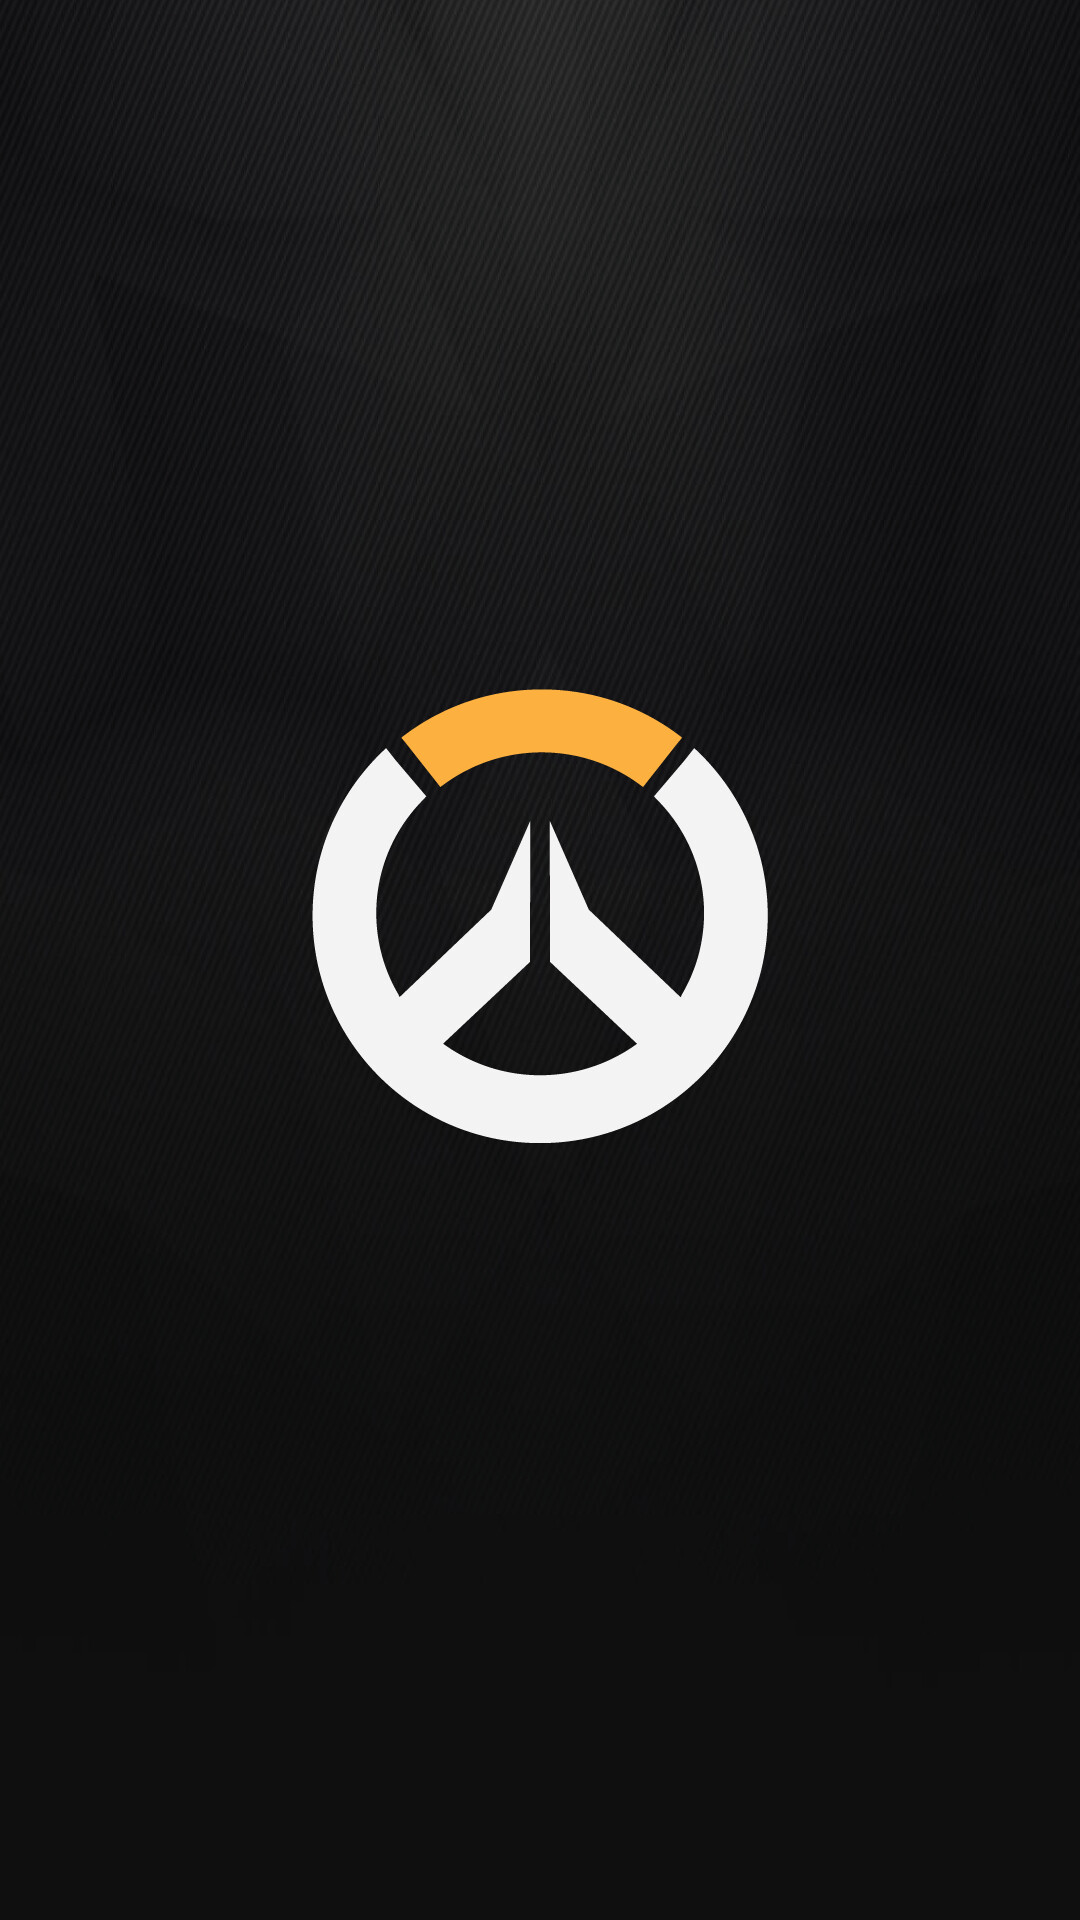 Overwatch: A series of online multiplayer first-person shooter video games. 1080x1920 Full HD Wallpaper.